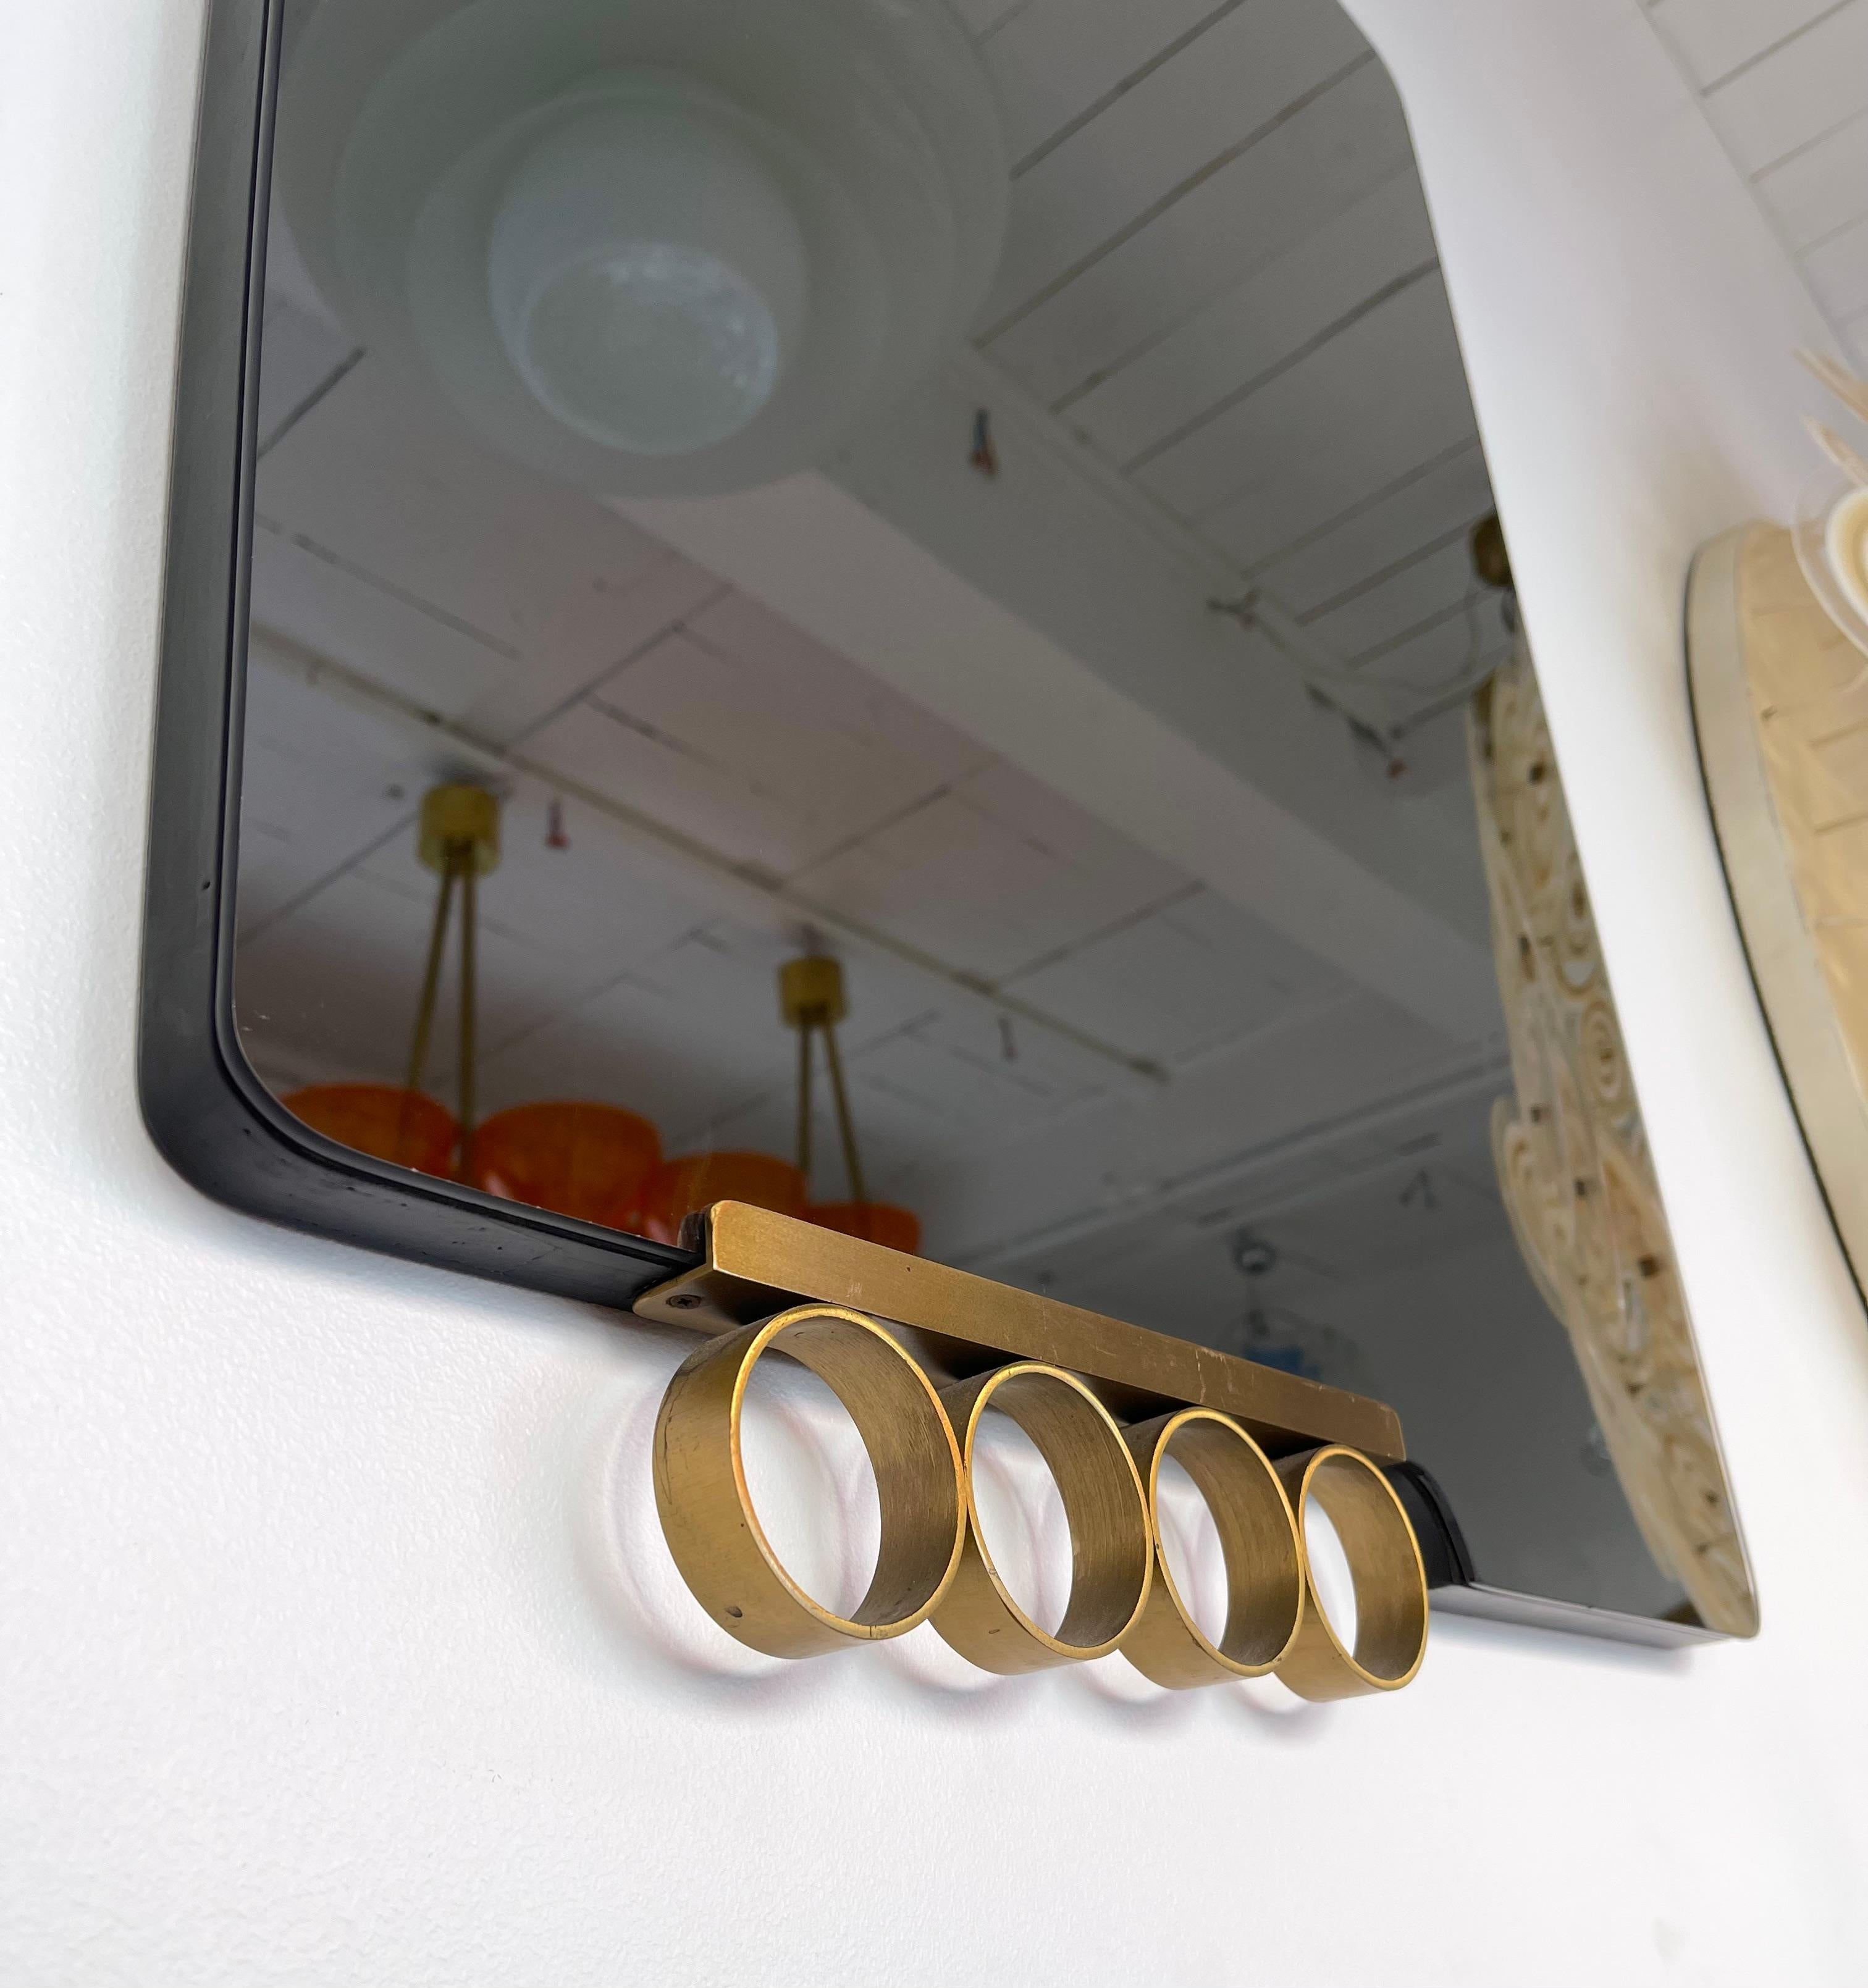 Pair of Mid-Century Modern Space Age wall mirrors brass disc by the italian design manufacture Modernindustria. Nice gold tinted mirror. Famous design like Romeo Rega, Tommaso Barbi, Sandro Petti for Maison Jansen, Willy Rizzo, Mario Sabot.

2